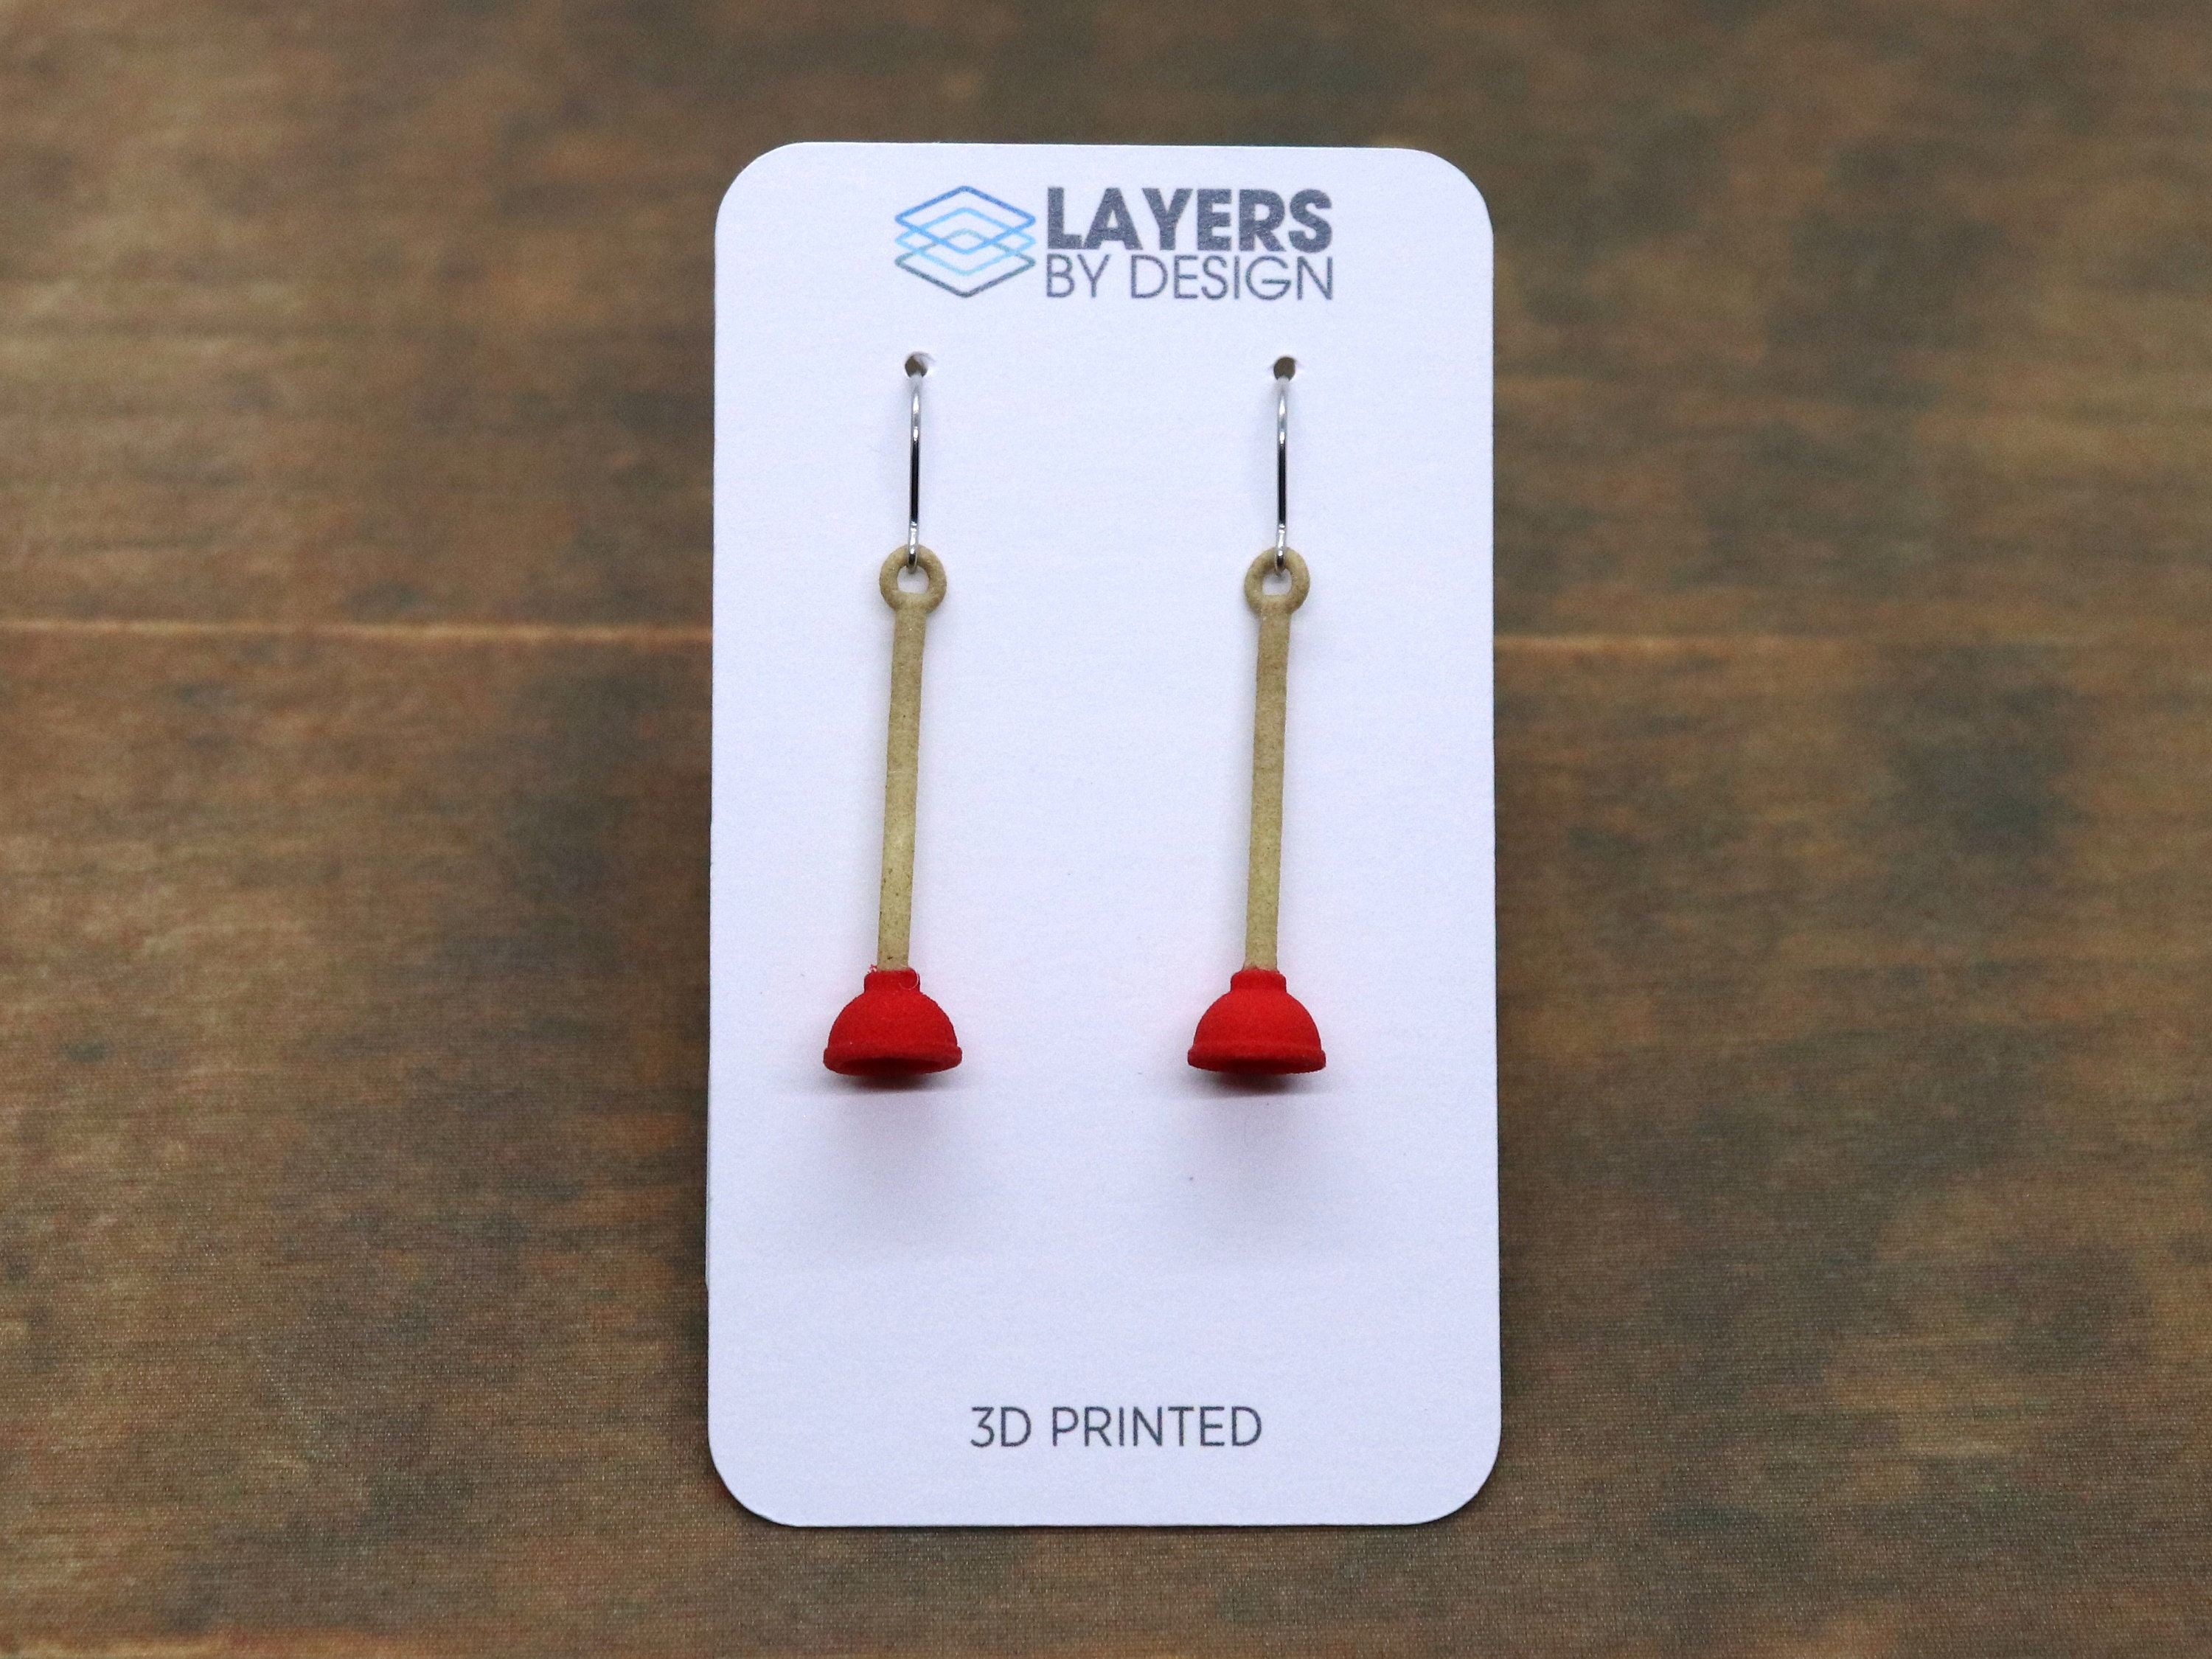 TOILET Privy Lavatory Loo Commode Bathroom Earrings Funny Jewelry